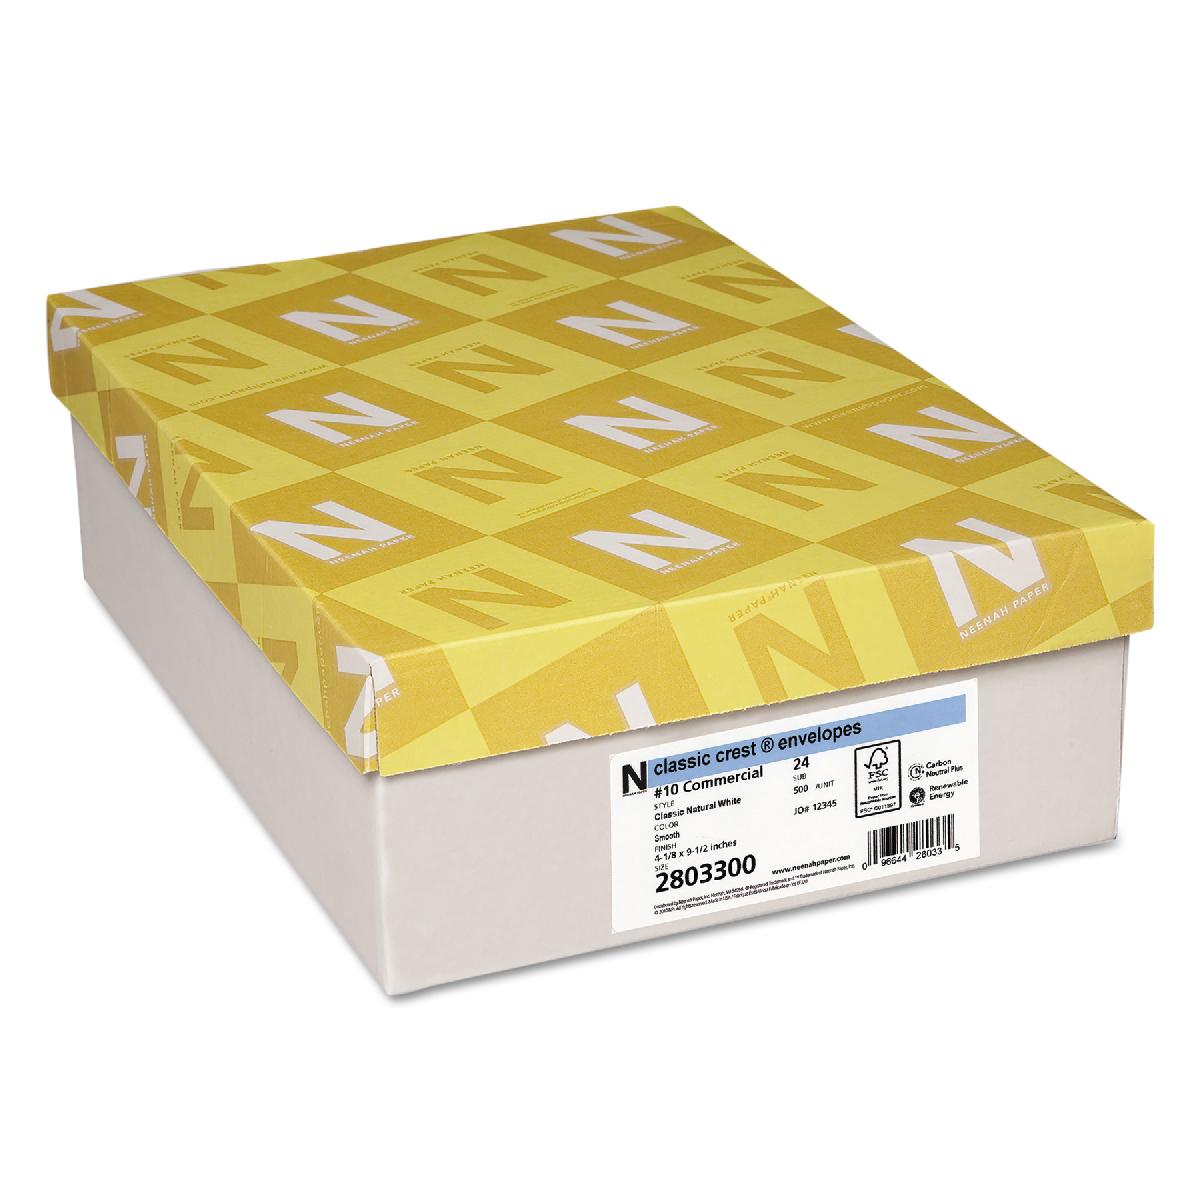 Neenah Paper® Classic Crest Saw Grass 24 lb. Smooth No. 10 Commercial Envelopes 500 Box